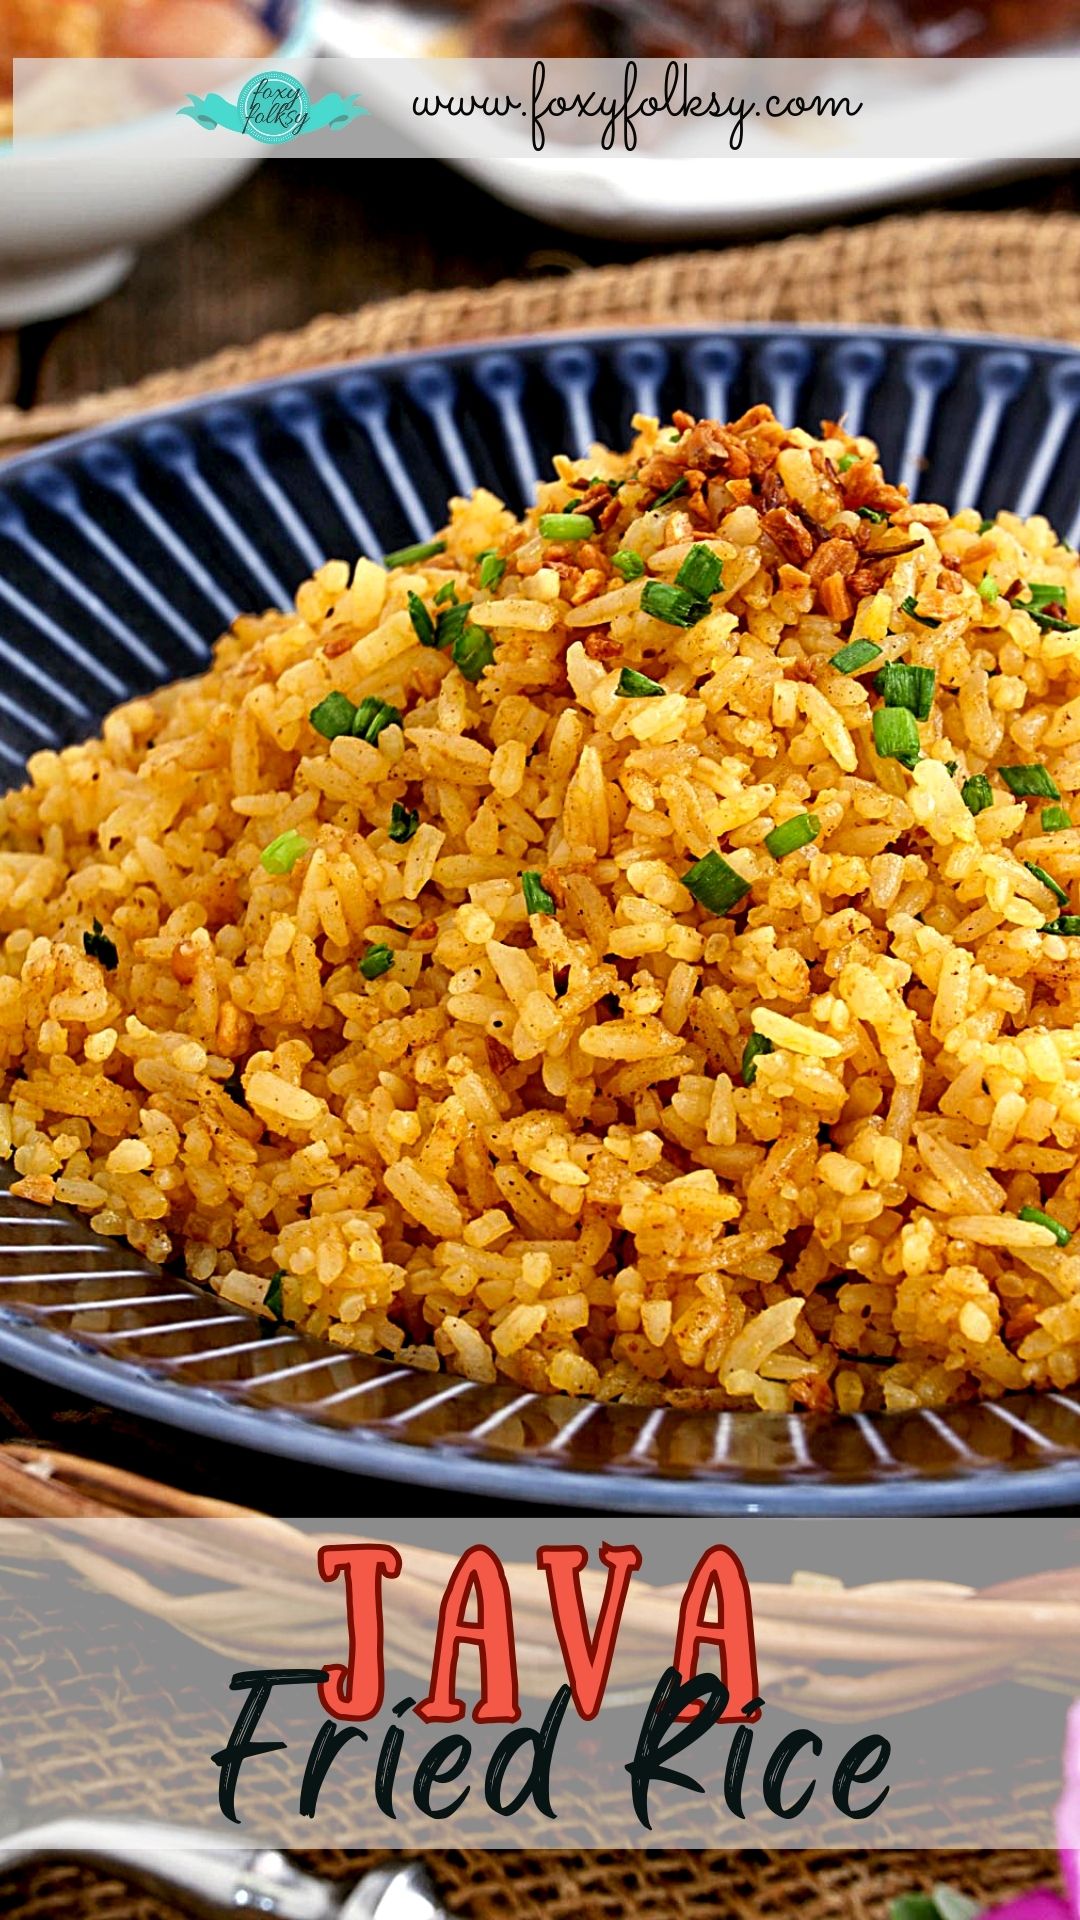 Java rice on a plate.